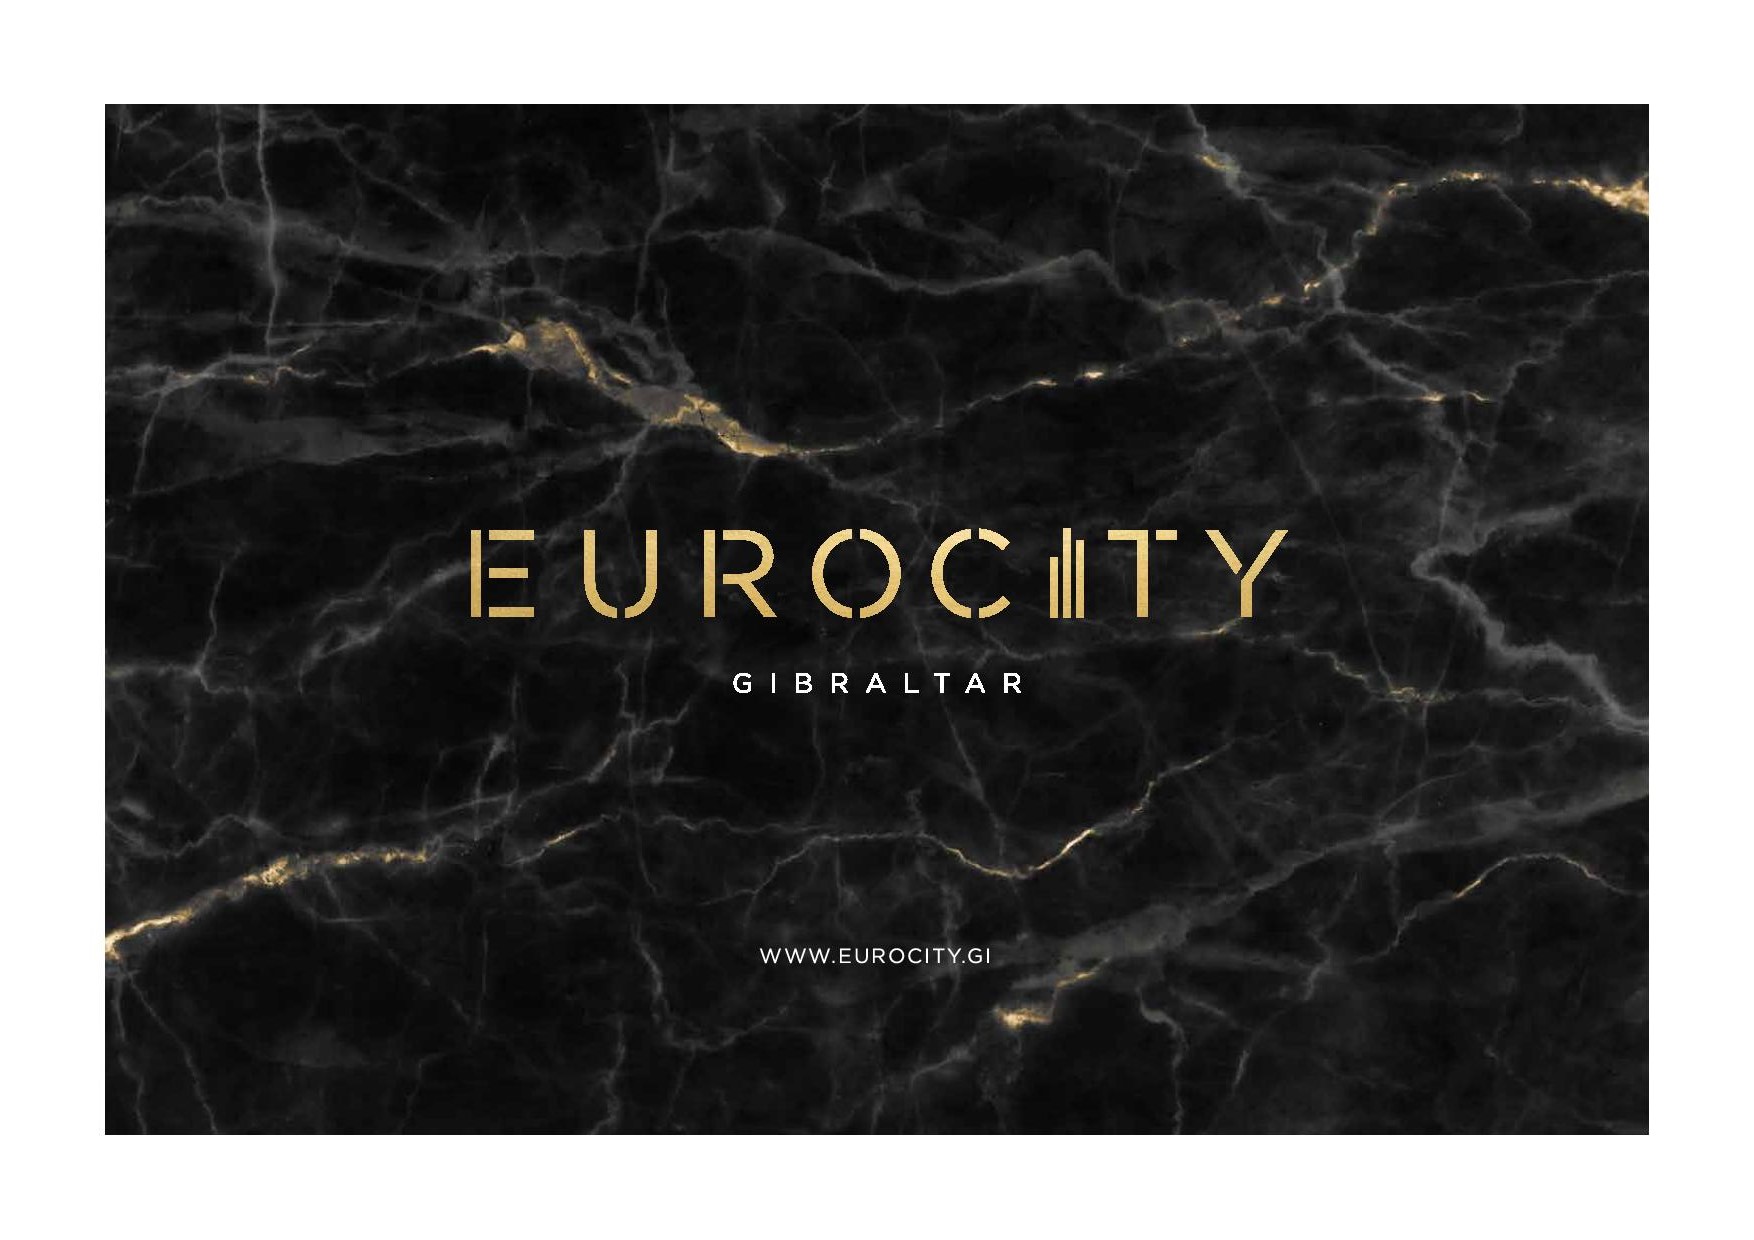 EuroCity virtual reality video released Image